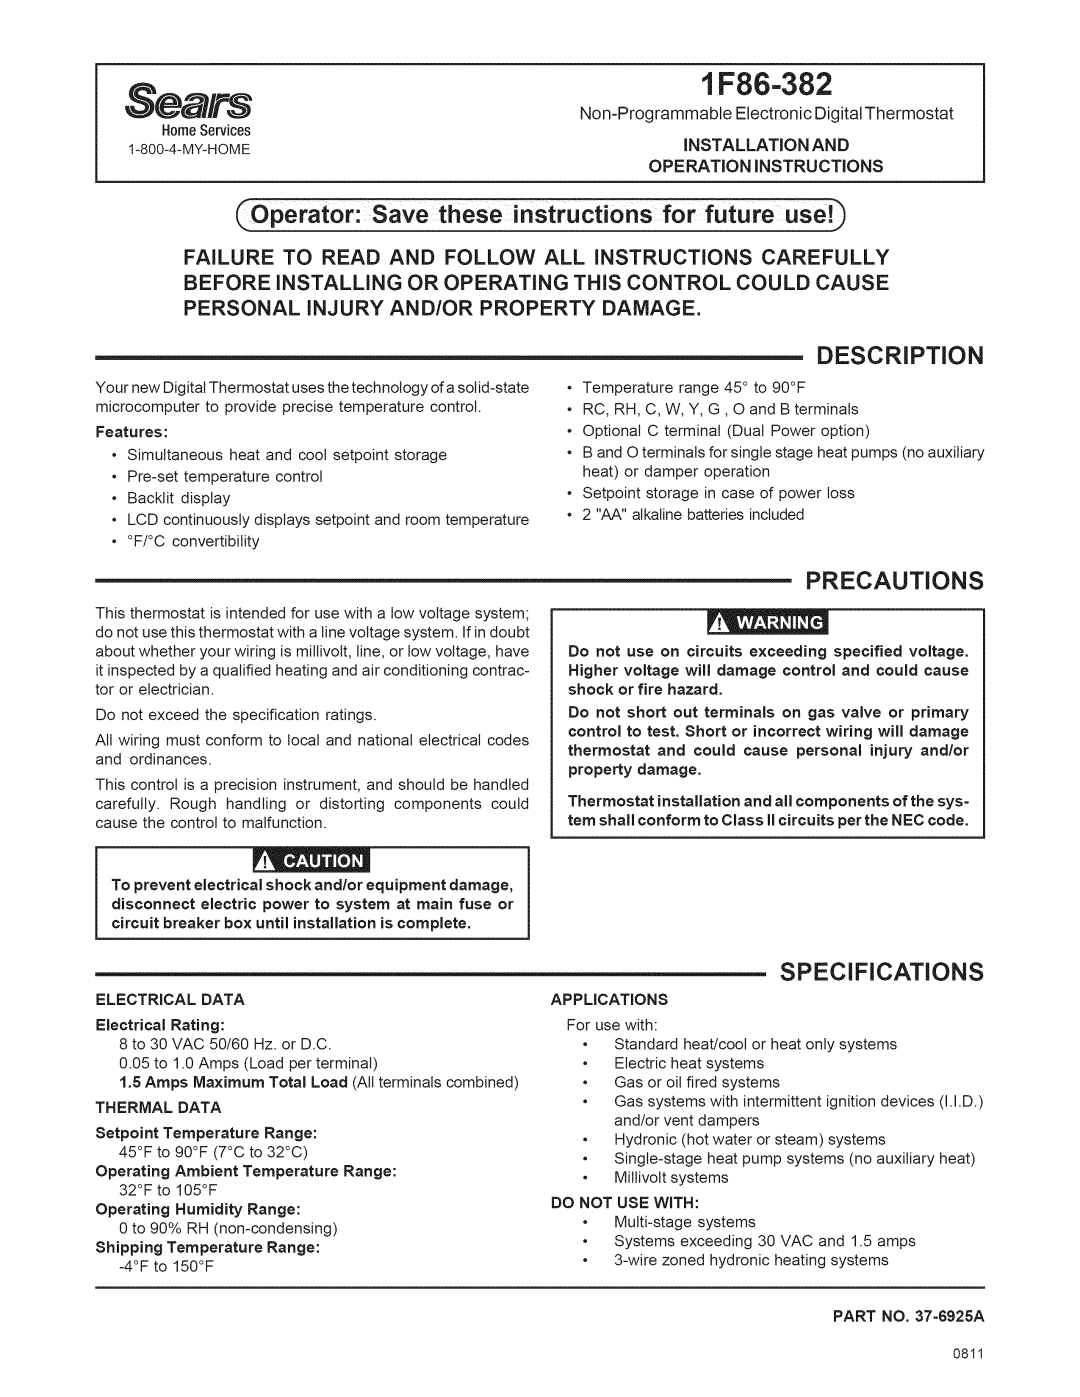 Sears 1F86-382 specifications hese, instructions for fu, DESCRiPTiON, Precautions, Specifications, Seal 